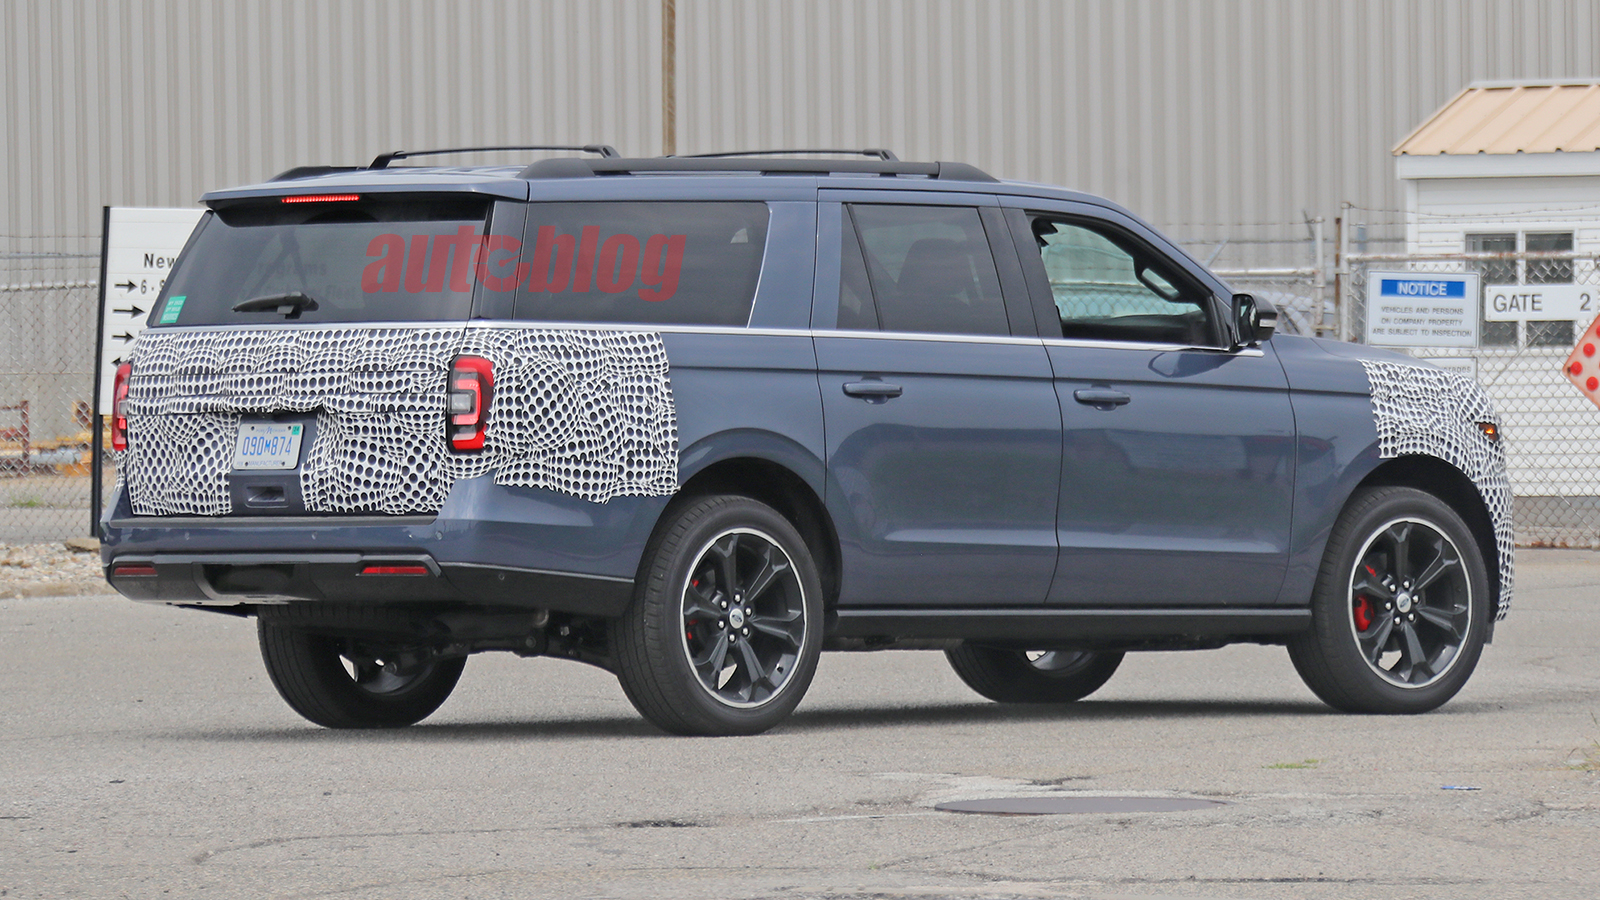 2022 Ford Expedition prototype in spy photos might be an ST